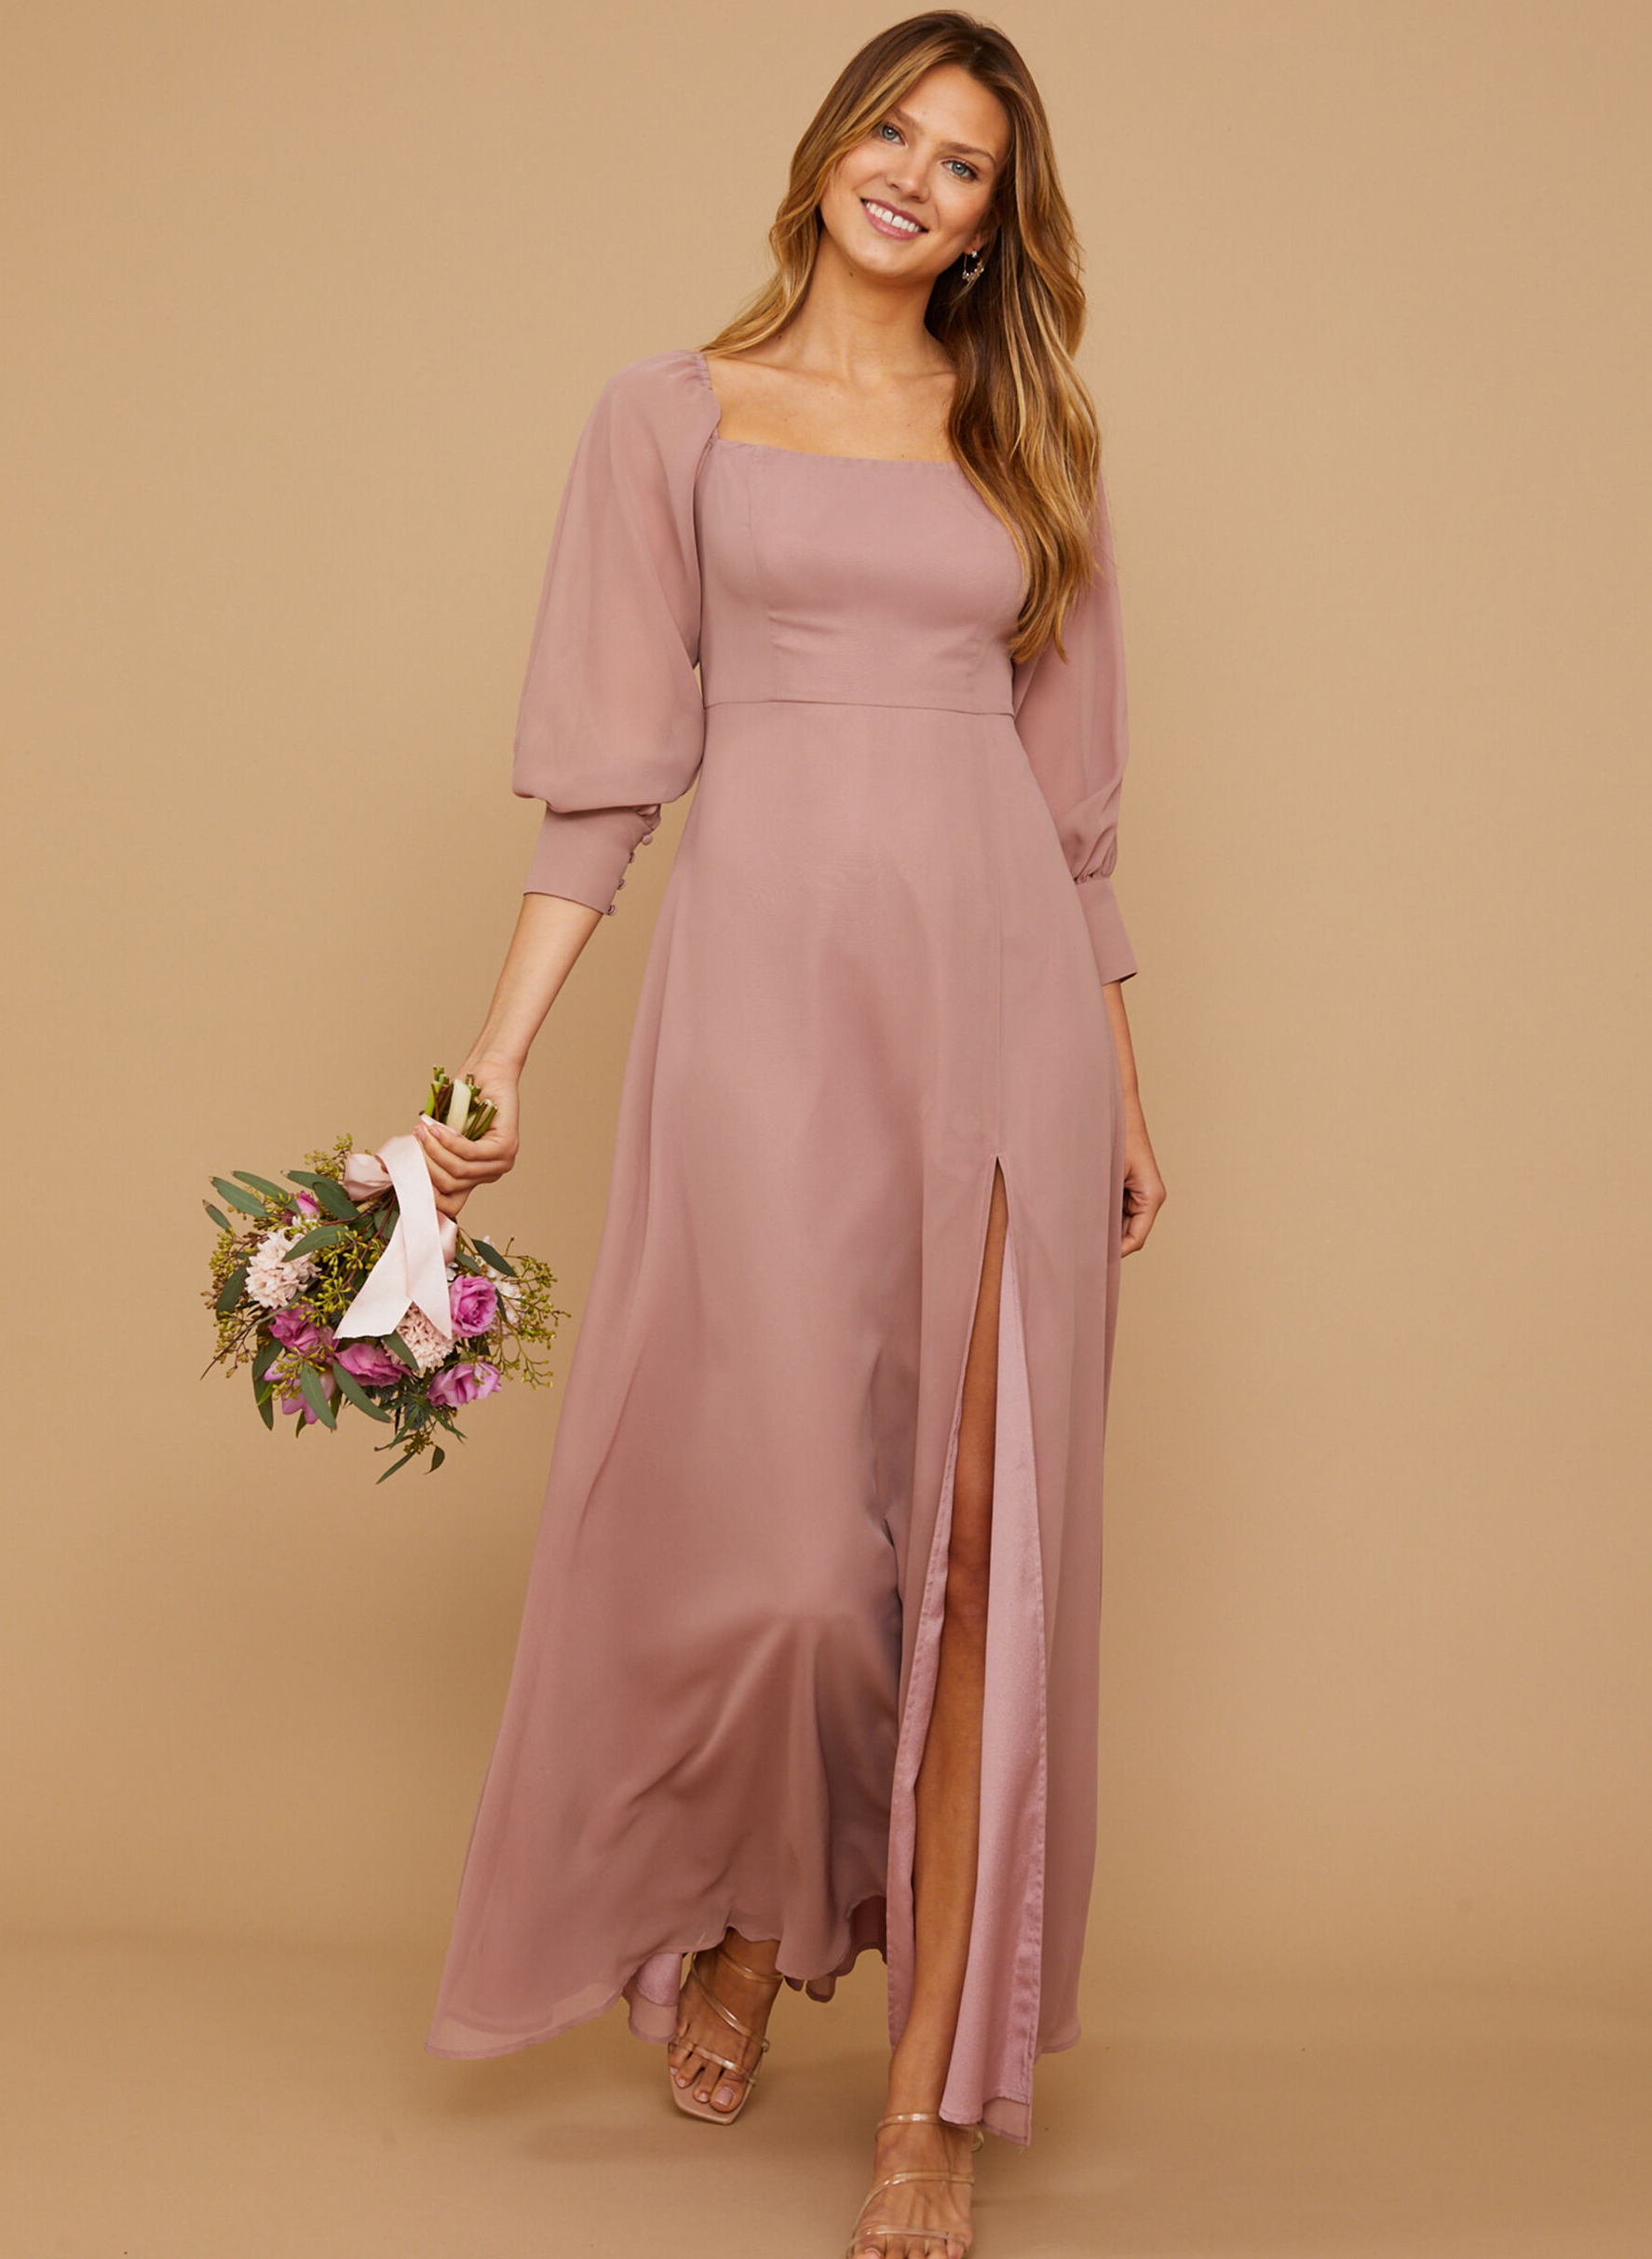 Long Sleeves Square Neckline Chiffon Bridesmaid Dresses With A-Line